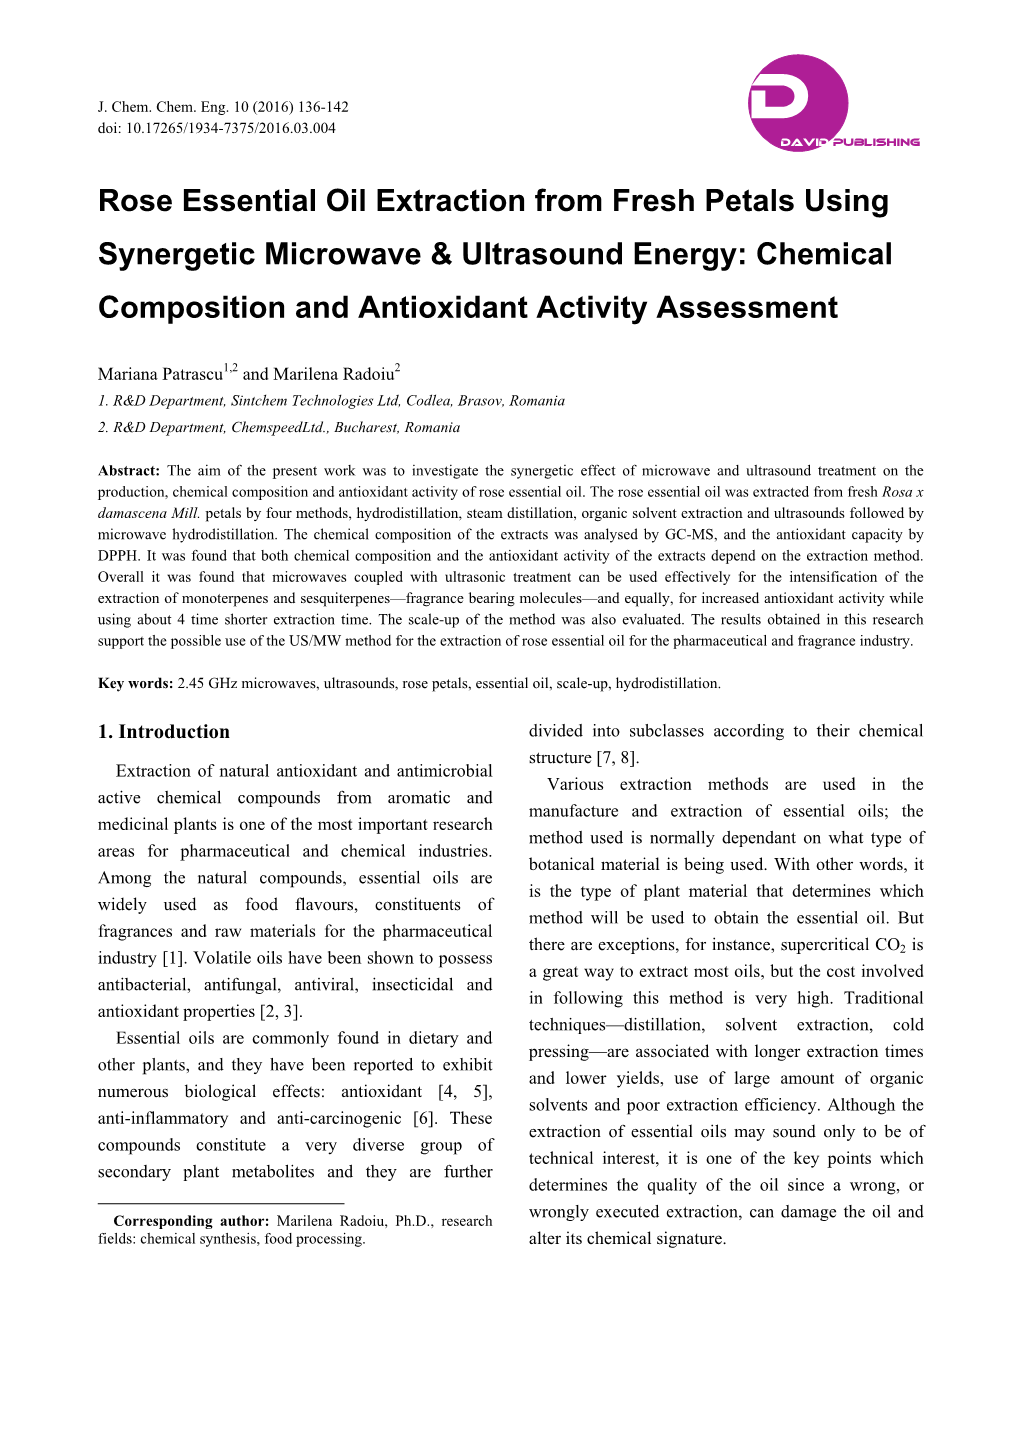 Rose Essential Oil Extraction from Fresh Petals Using Synergetic Microwave & Ultrasound Energy: Chemical Composition and Antioxidant Activity Assessment